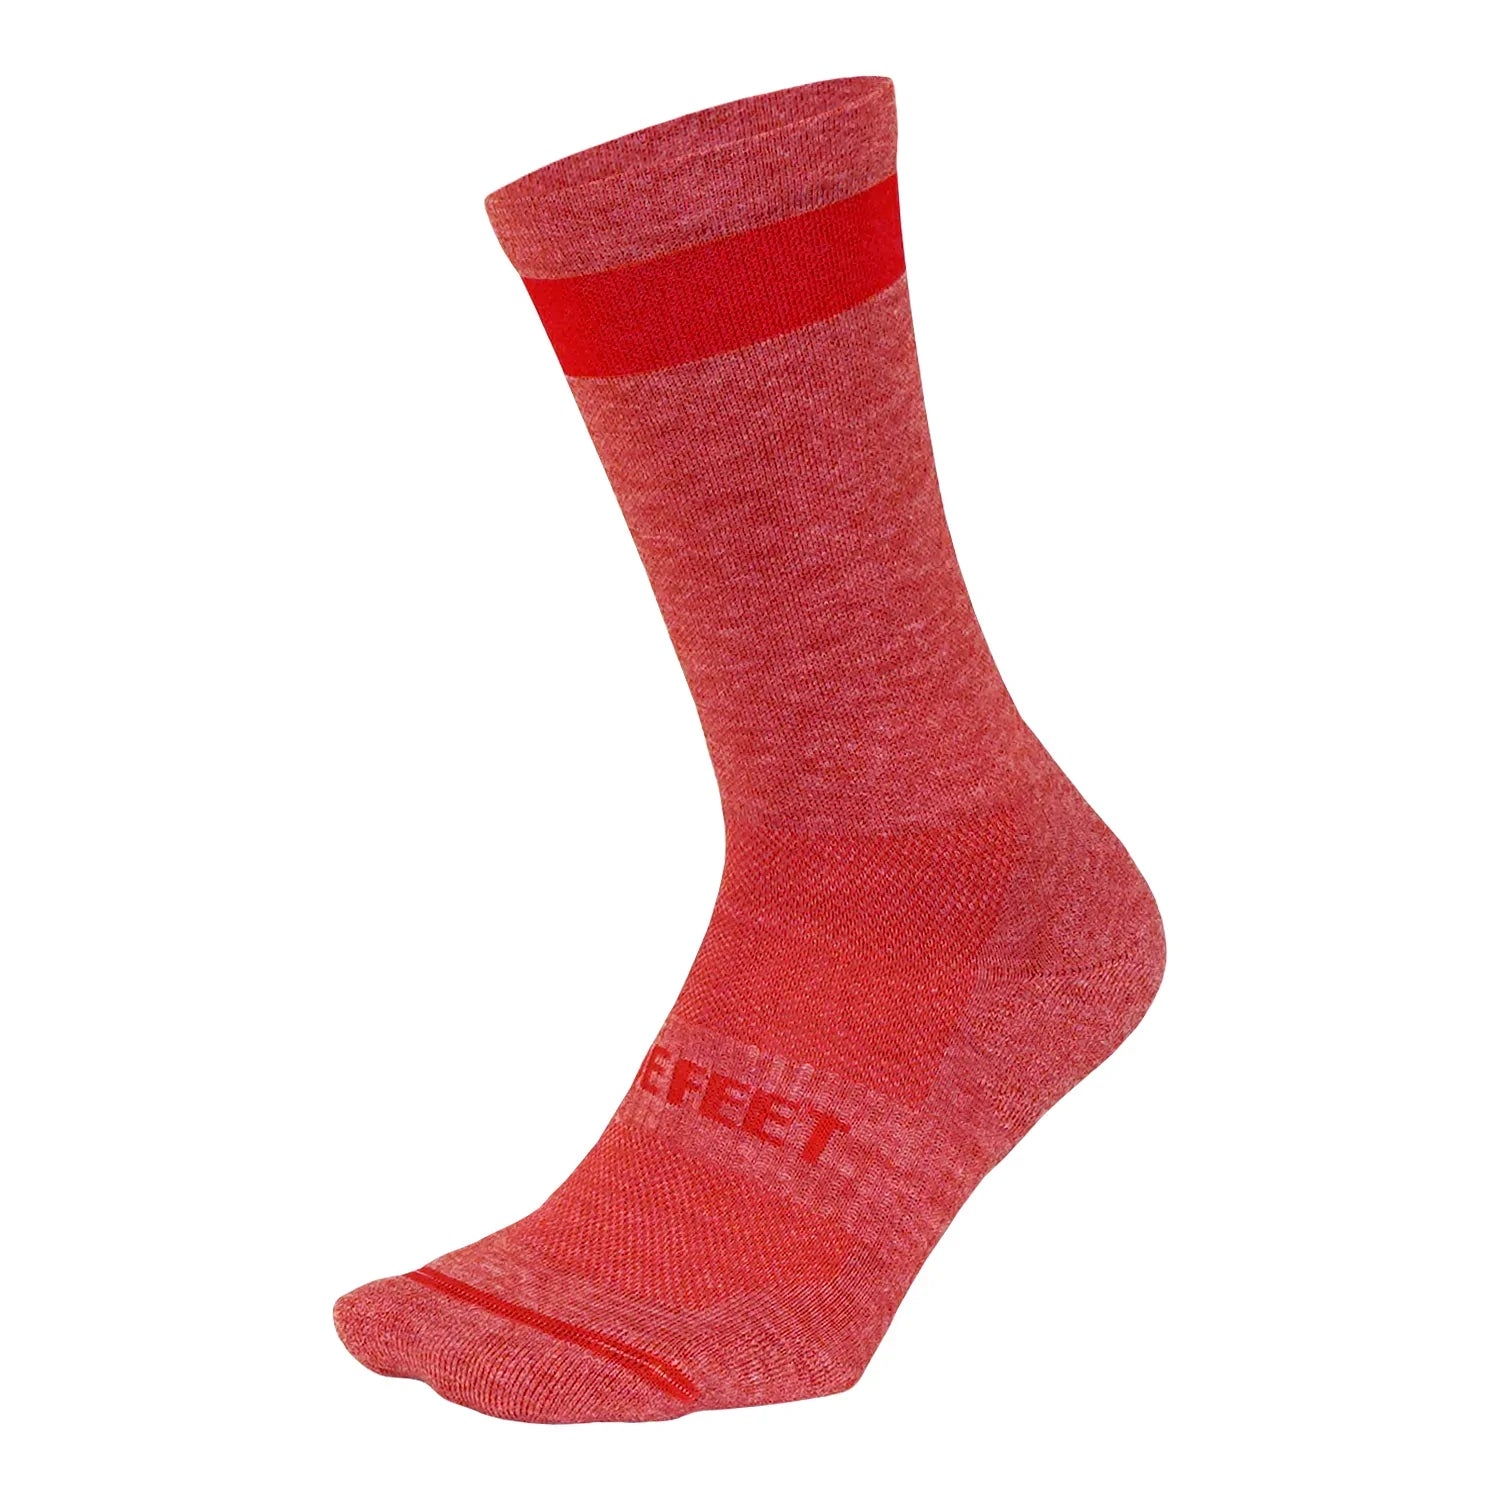 DeFeet Cush wool cycling sock in red with a wide bright red cuff stripe